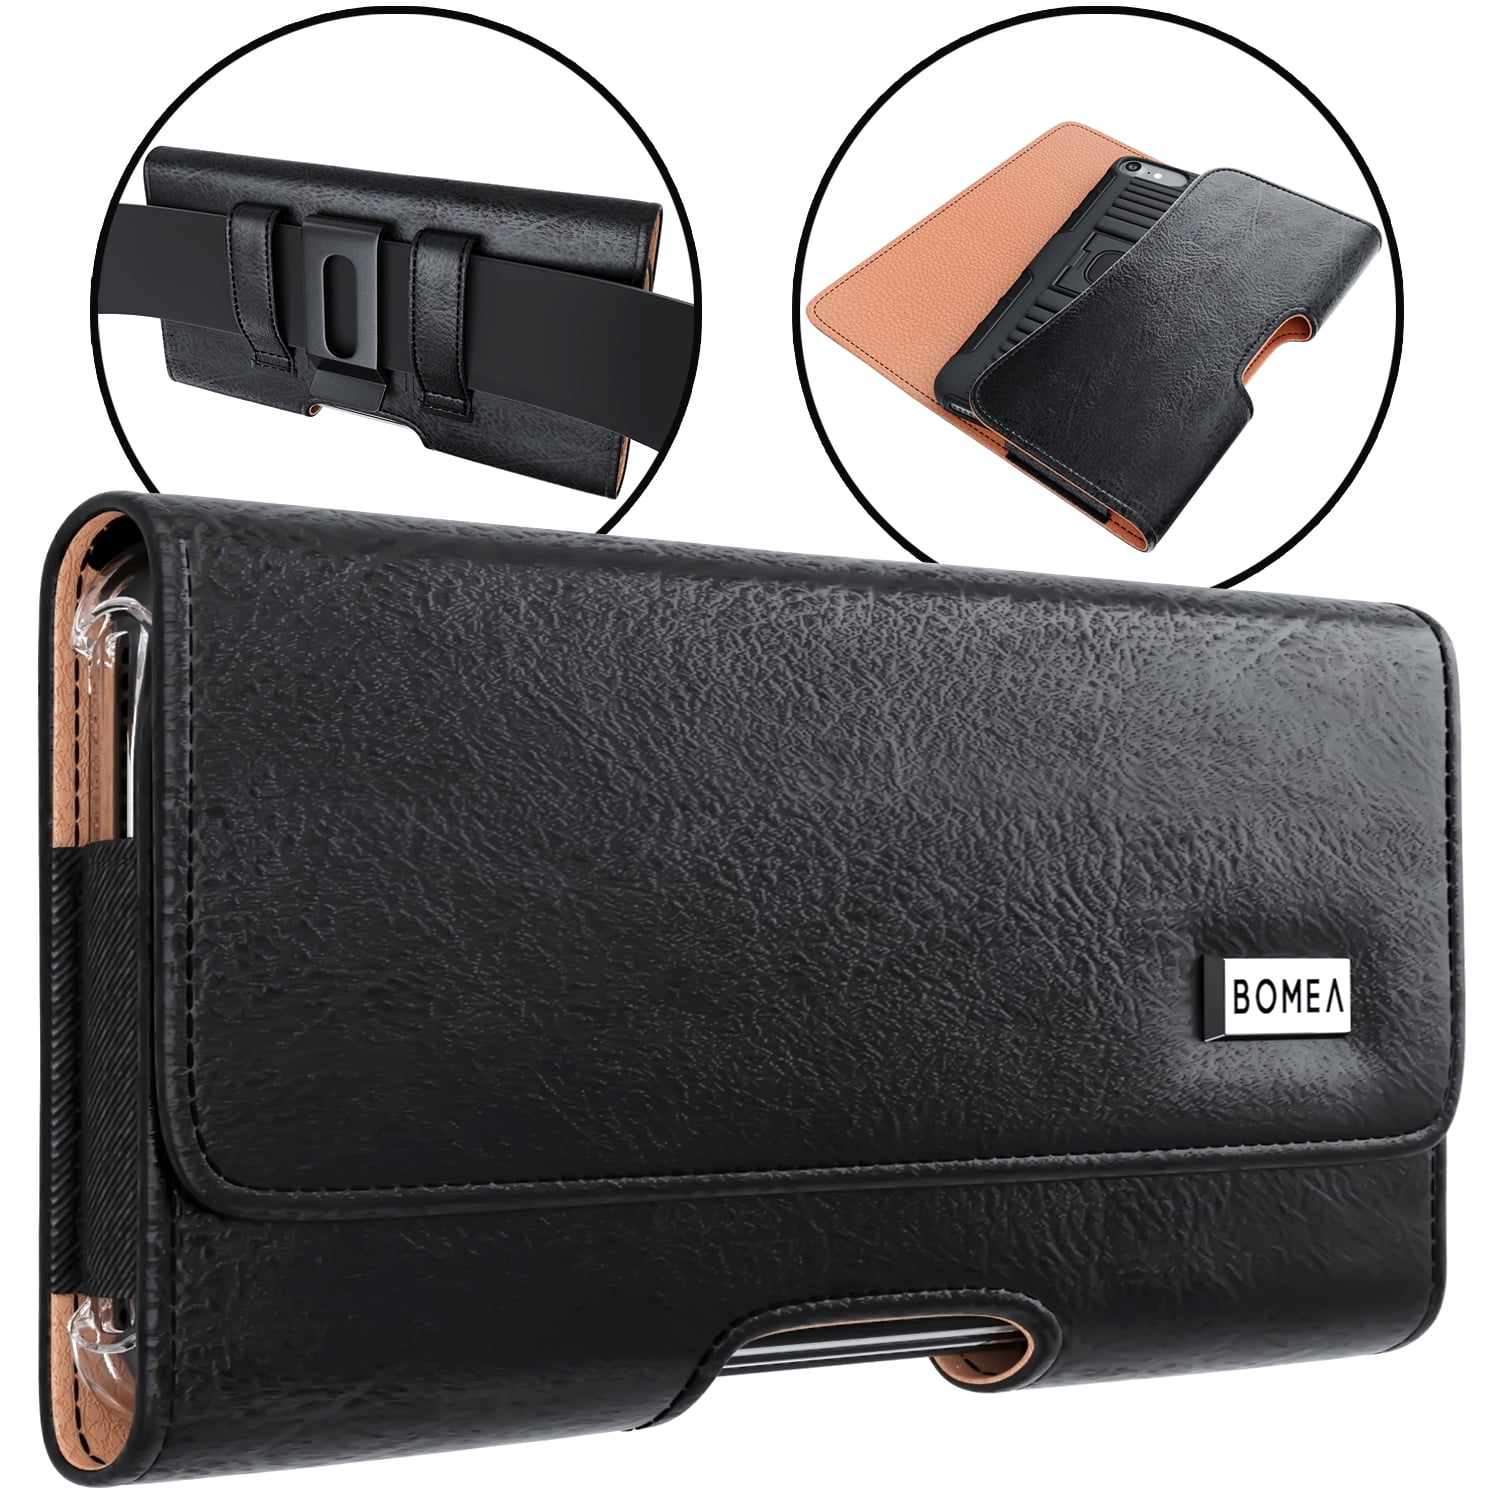 heavy-duty-galaxy-s10-holster-s9-belt-holder-case-carrying-leather-phone-pouch-with-belt-clip